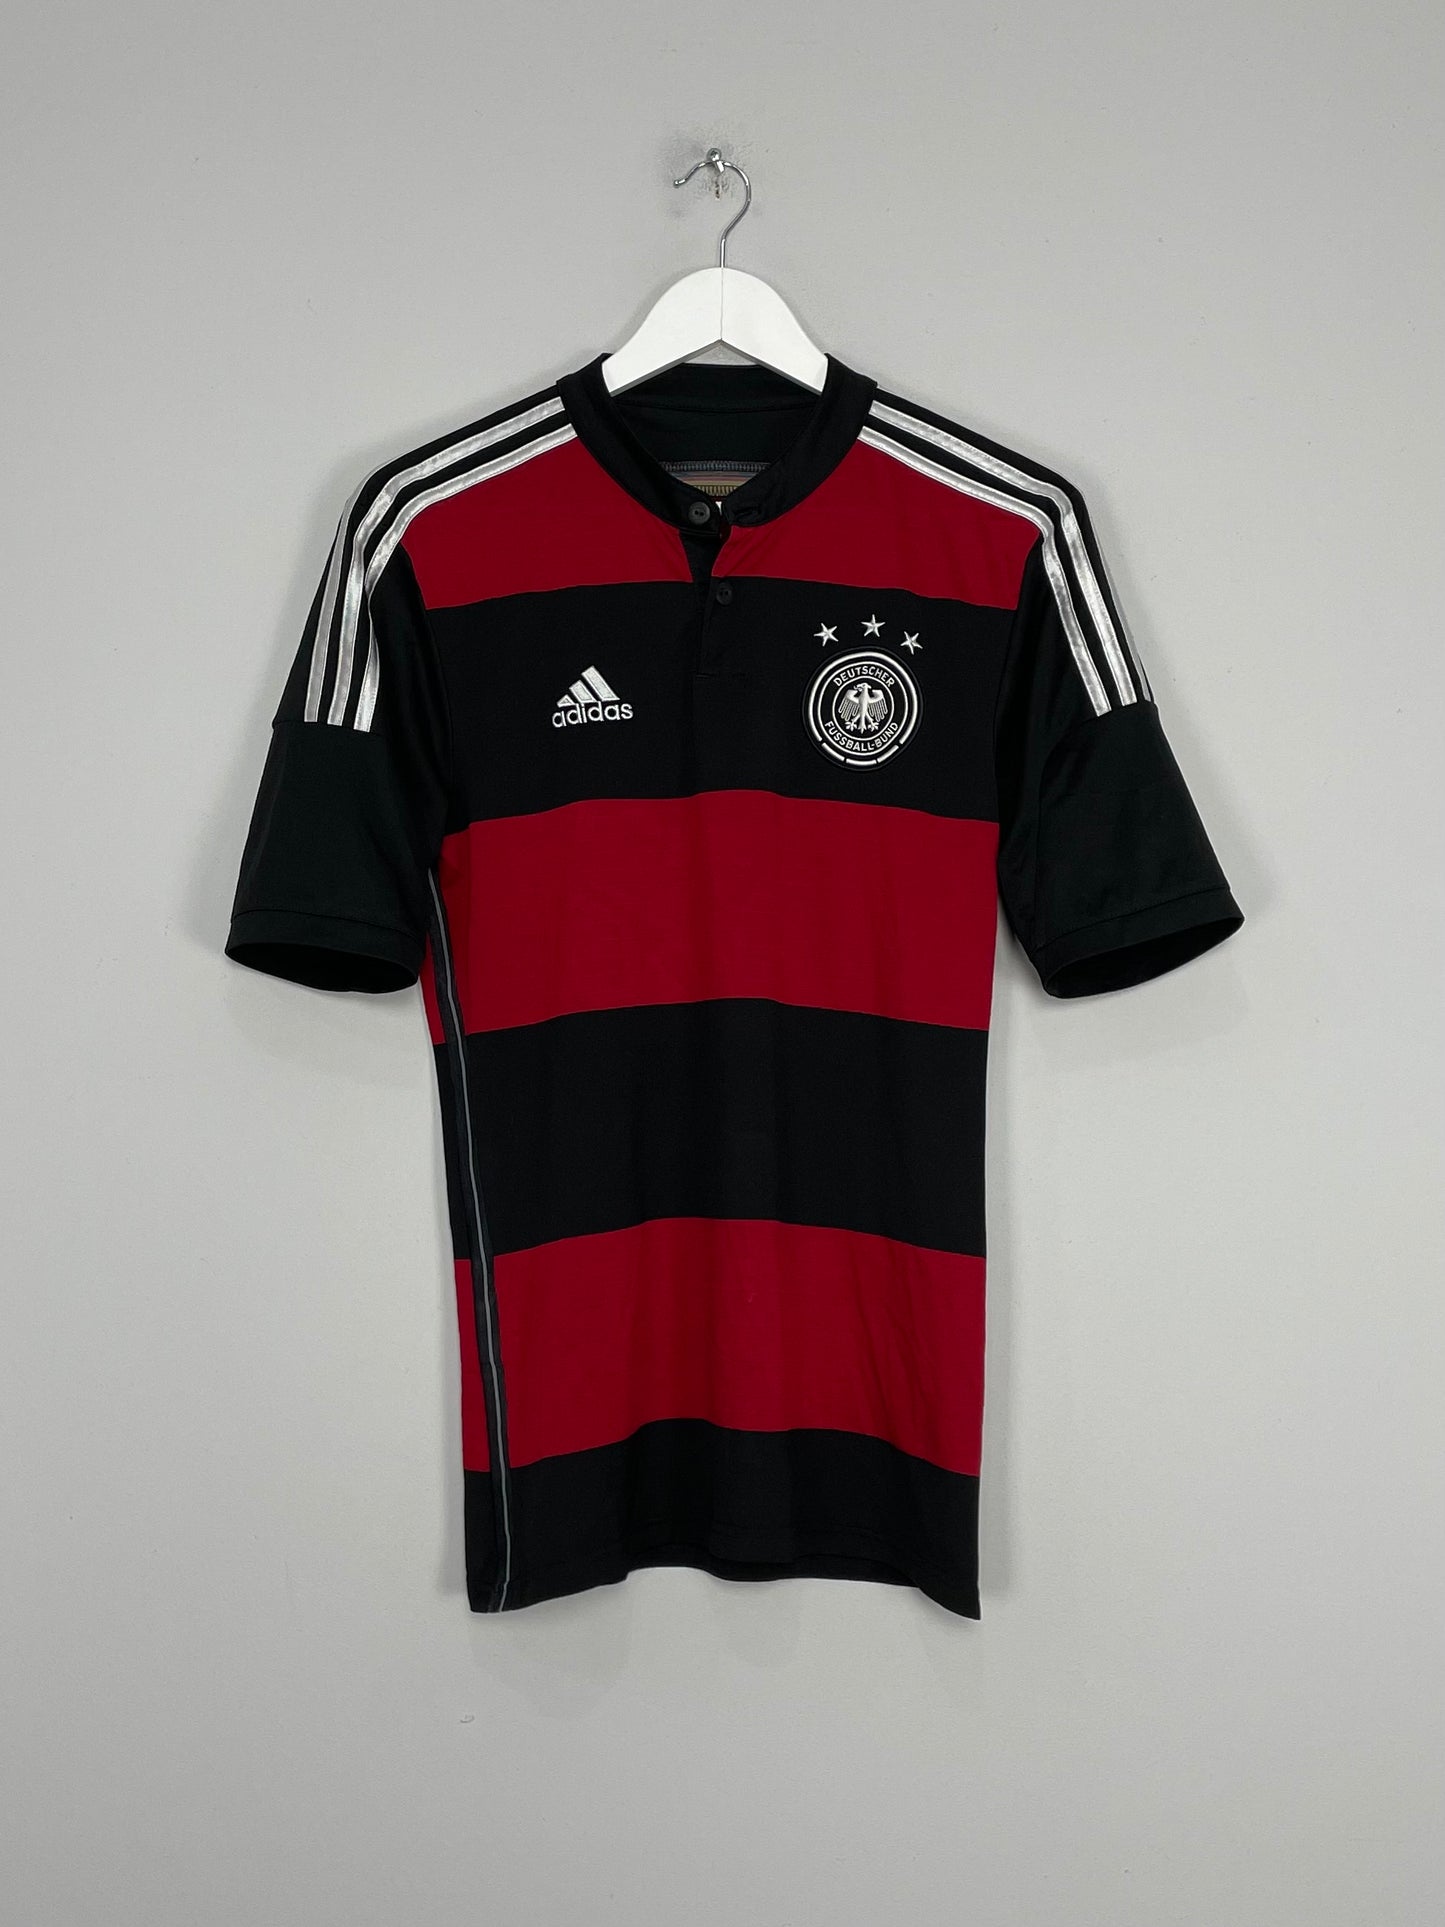 Image of the Germany shirt from the 2014/15 season